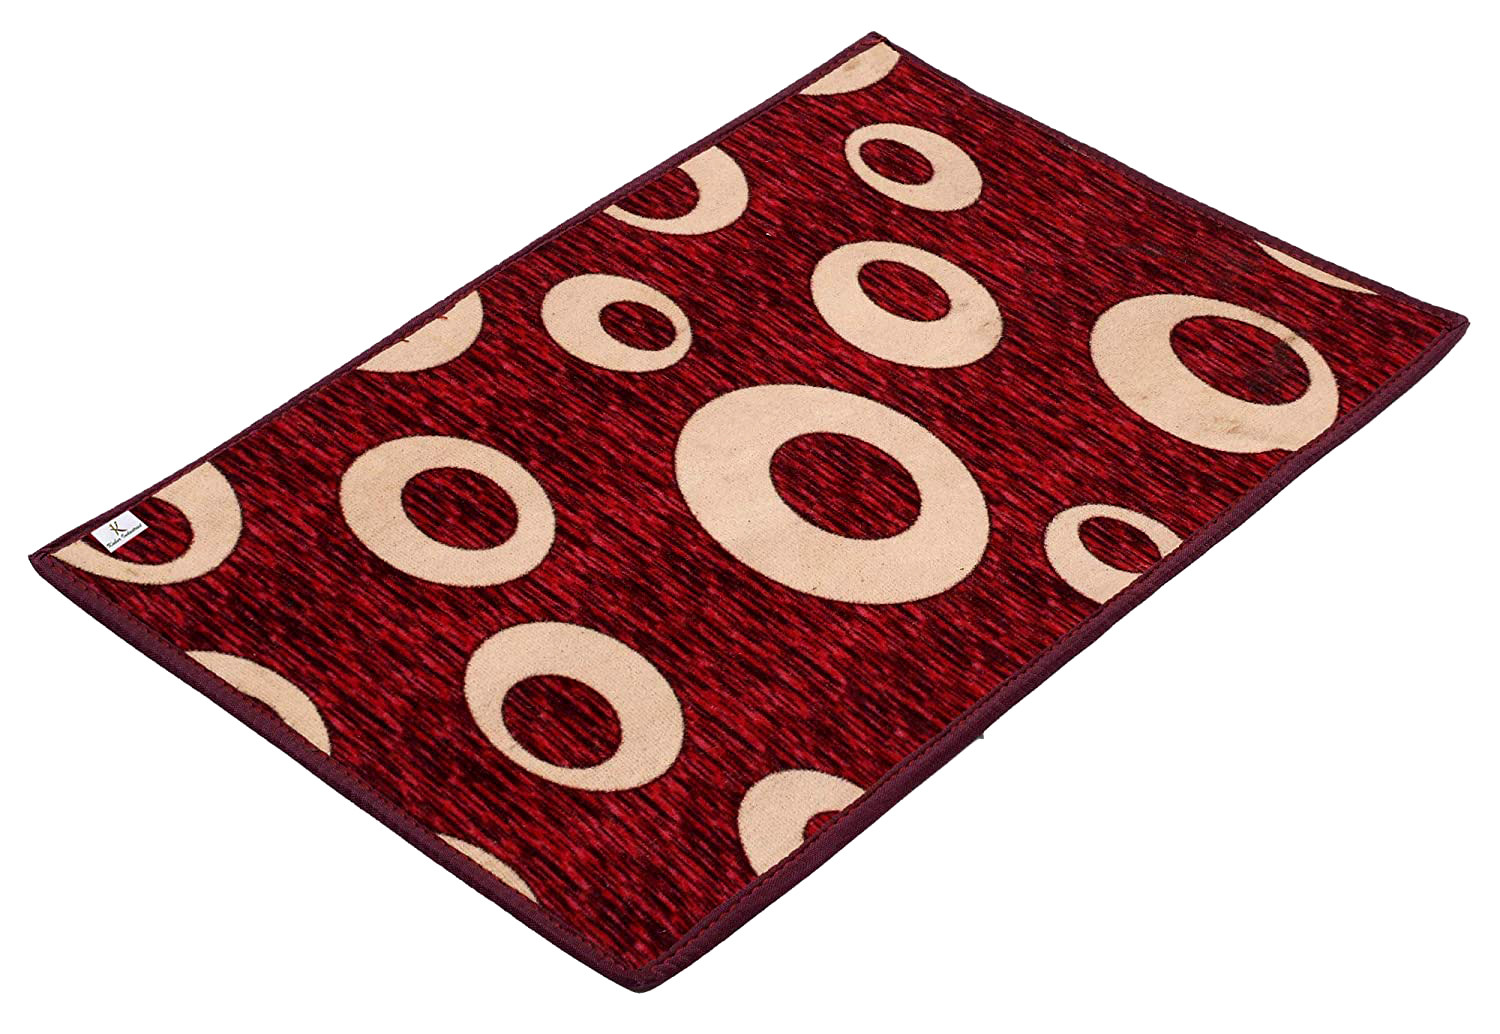 Kuber Industries Oval Design Soft, lightweigth, Washable, Non Slip Doormat Entrance Rug Dirt Trapper Mat Shoes Scraper for Entry, Patio, Porch,(Maroon)